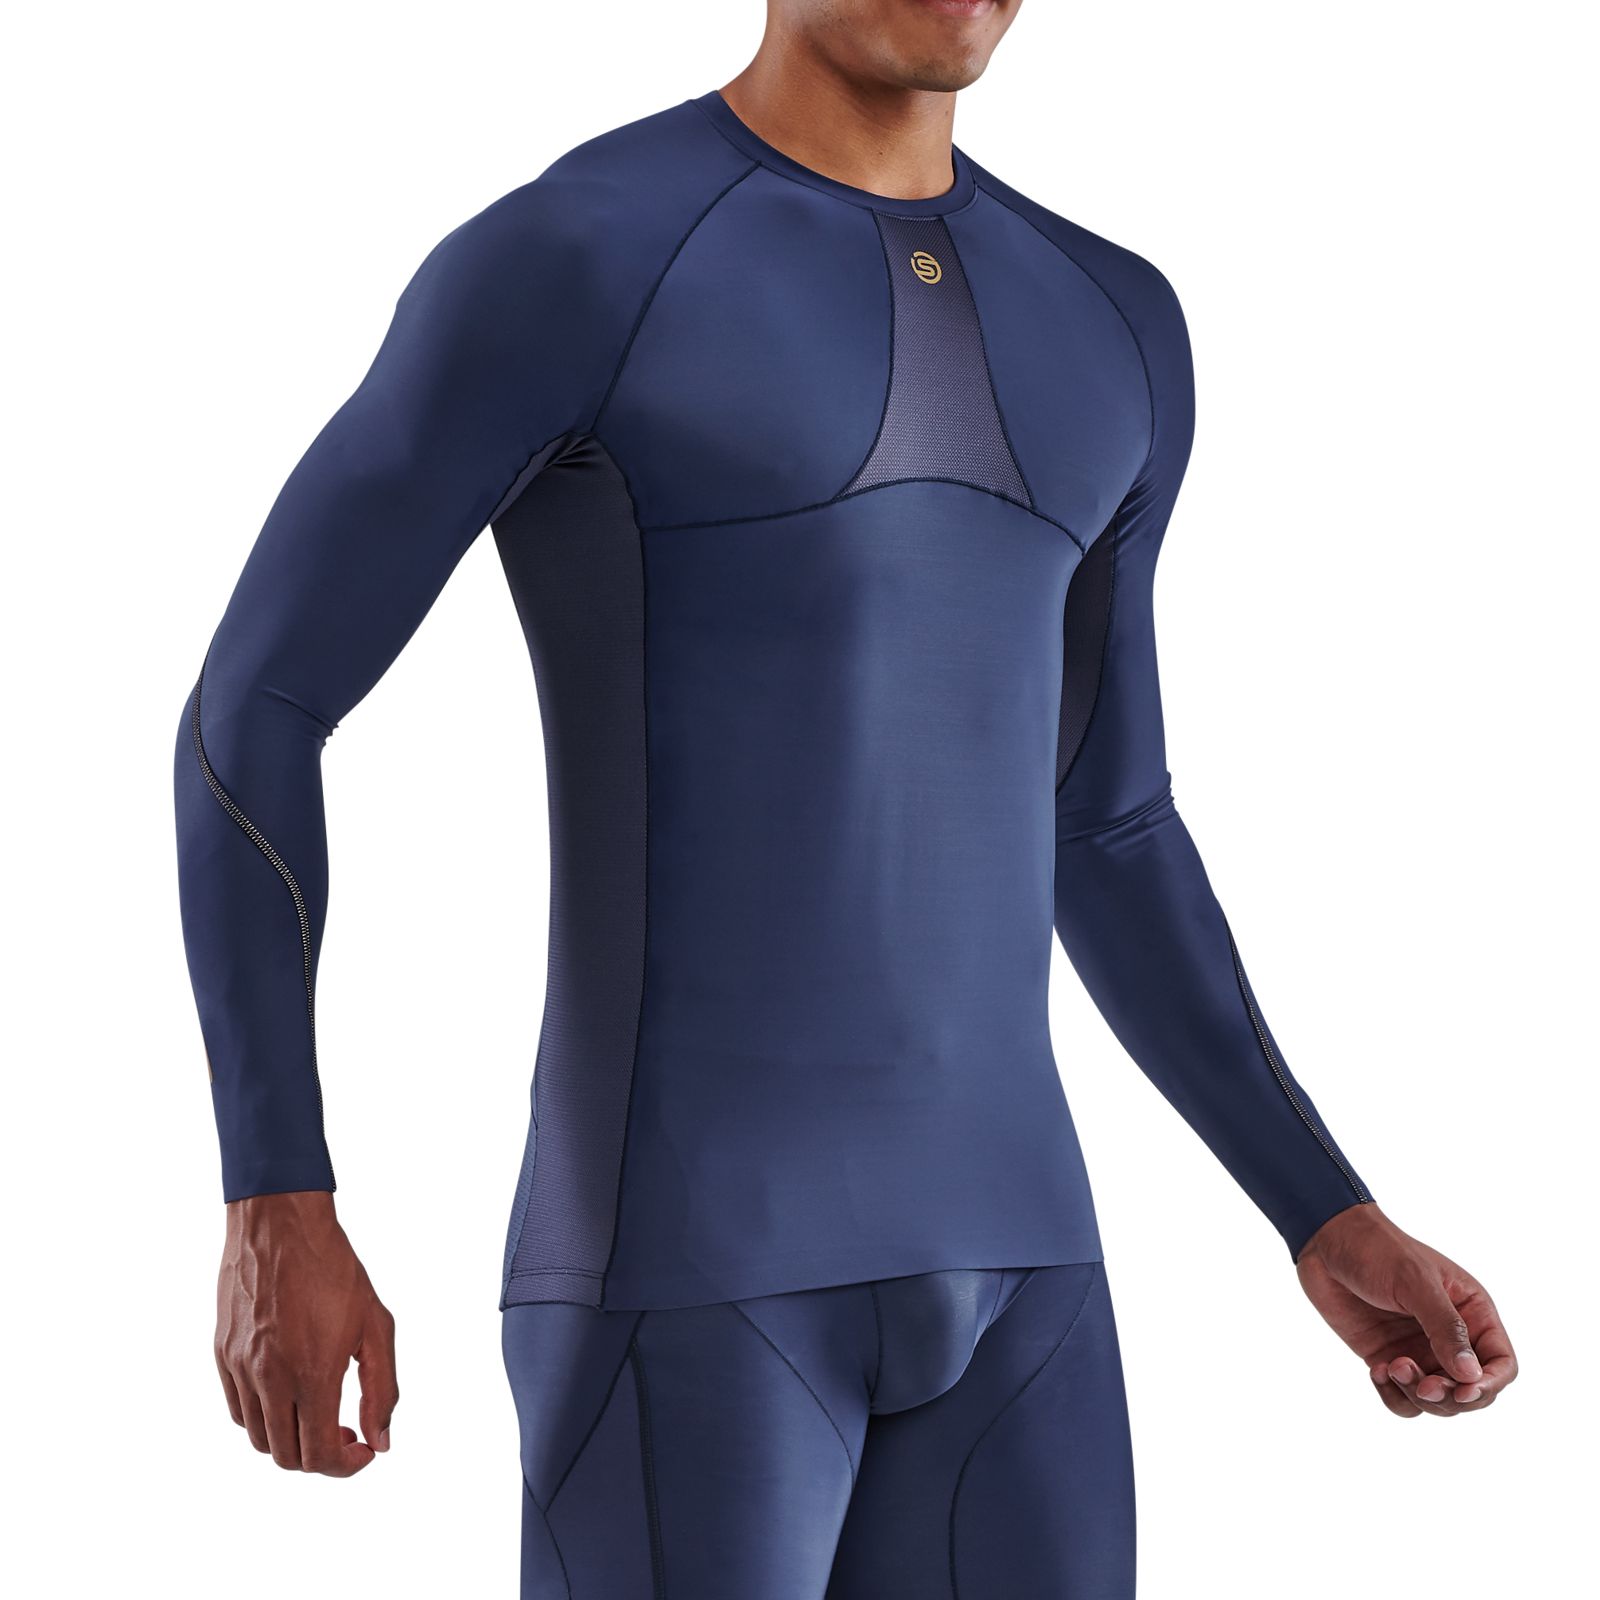 SKINS SERIES-1 MEN'S LONG SLEEVE TOP WHITE - SKINS Compression USA